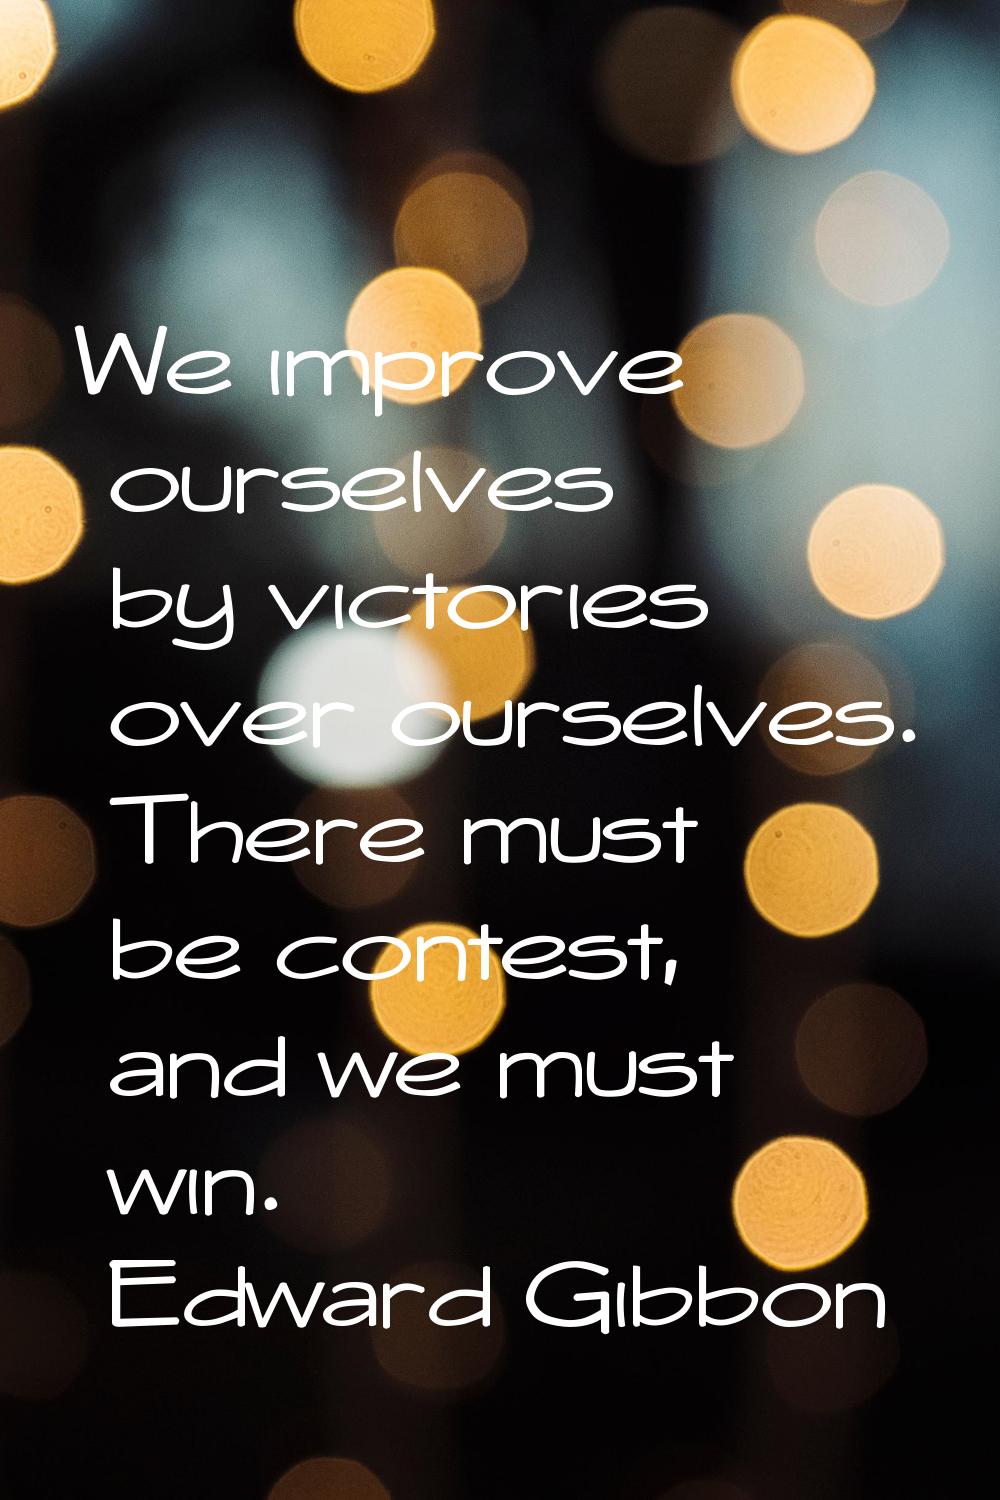 We improve ourselves by victories over ourselves. There must be contest, and we must win.